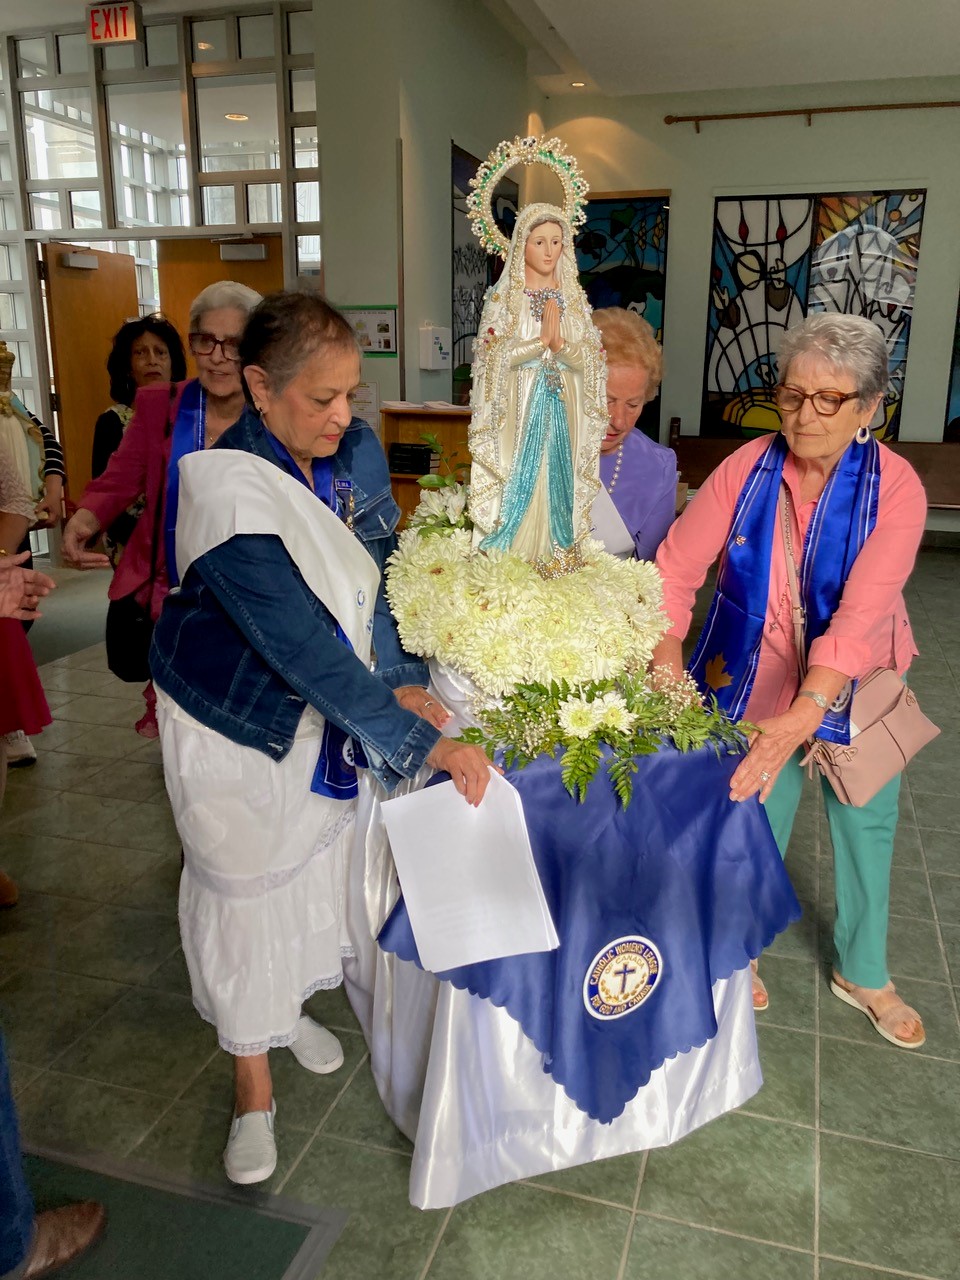 CWL members with statue of Our Lady